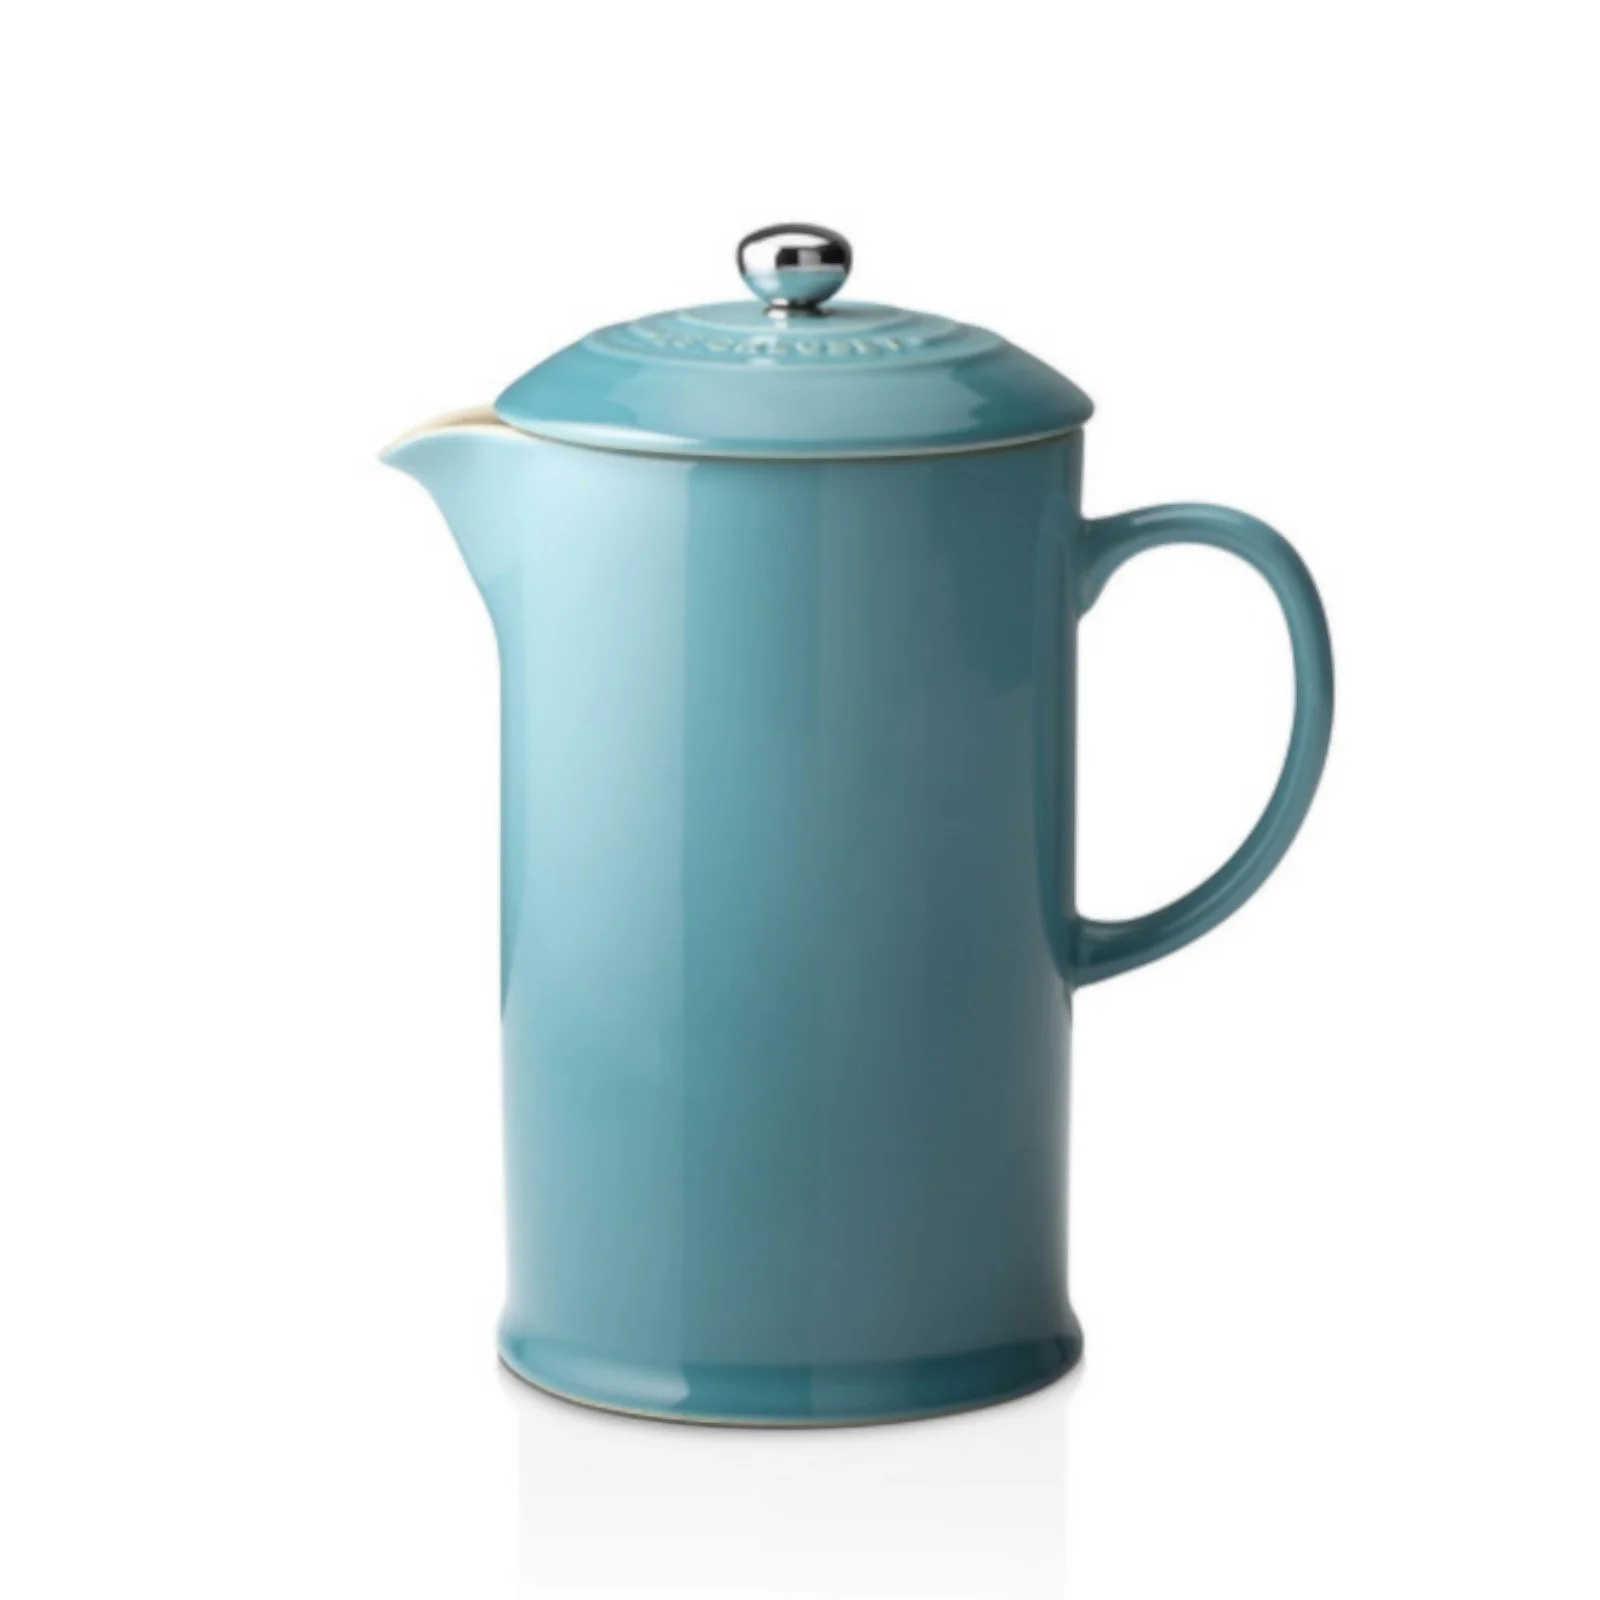 Le Creuset Stoneware Cafetiere Coffee Press - Teal Image 1